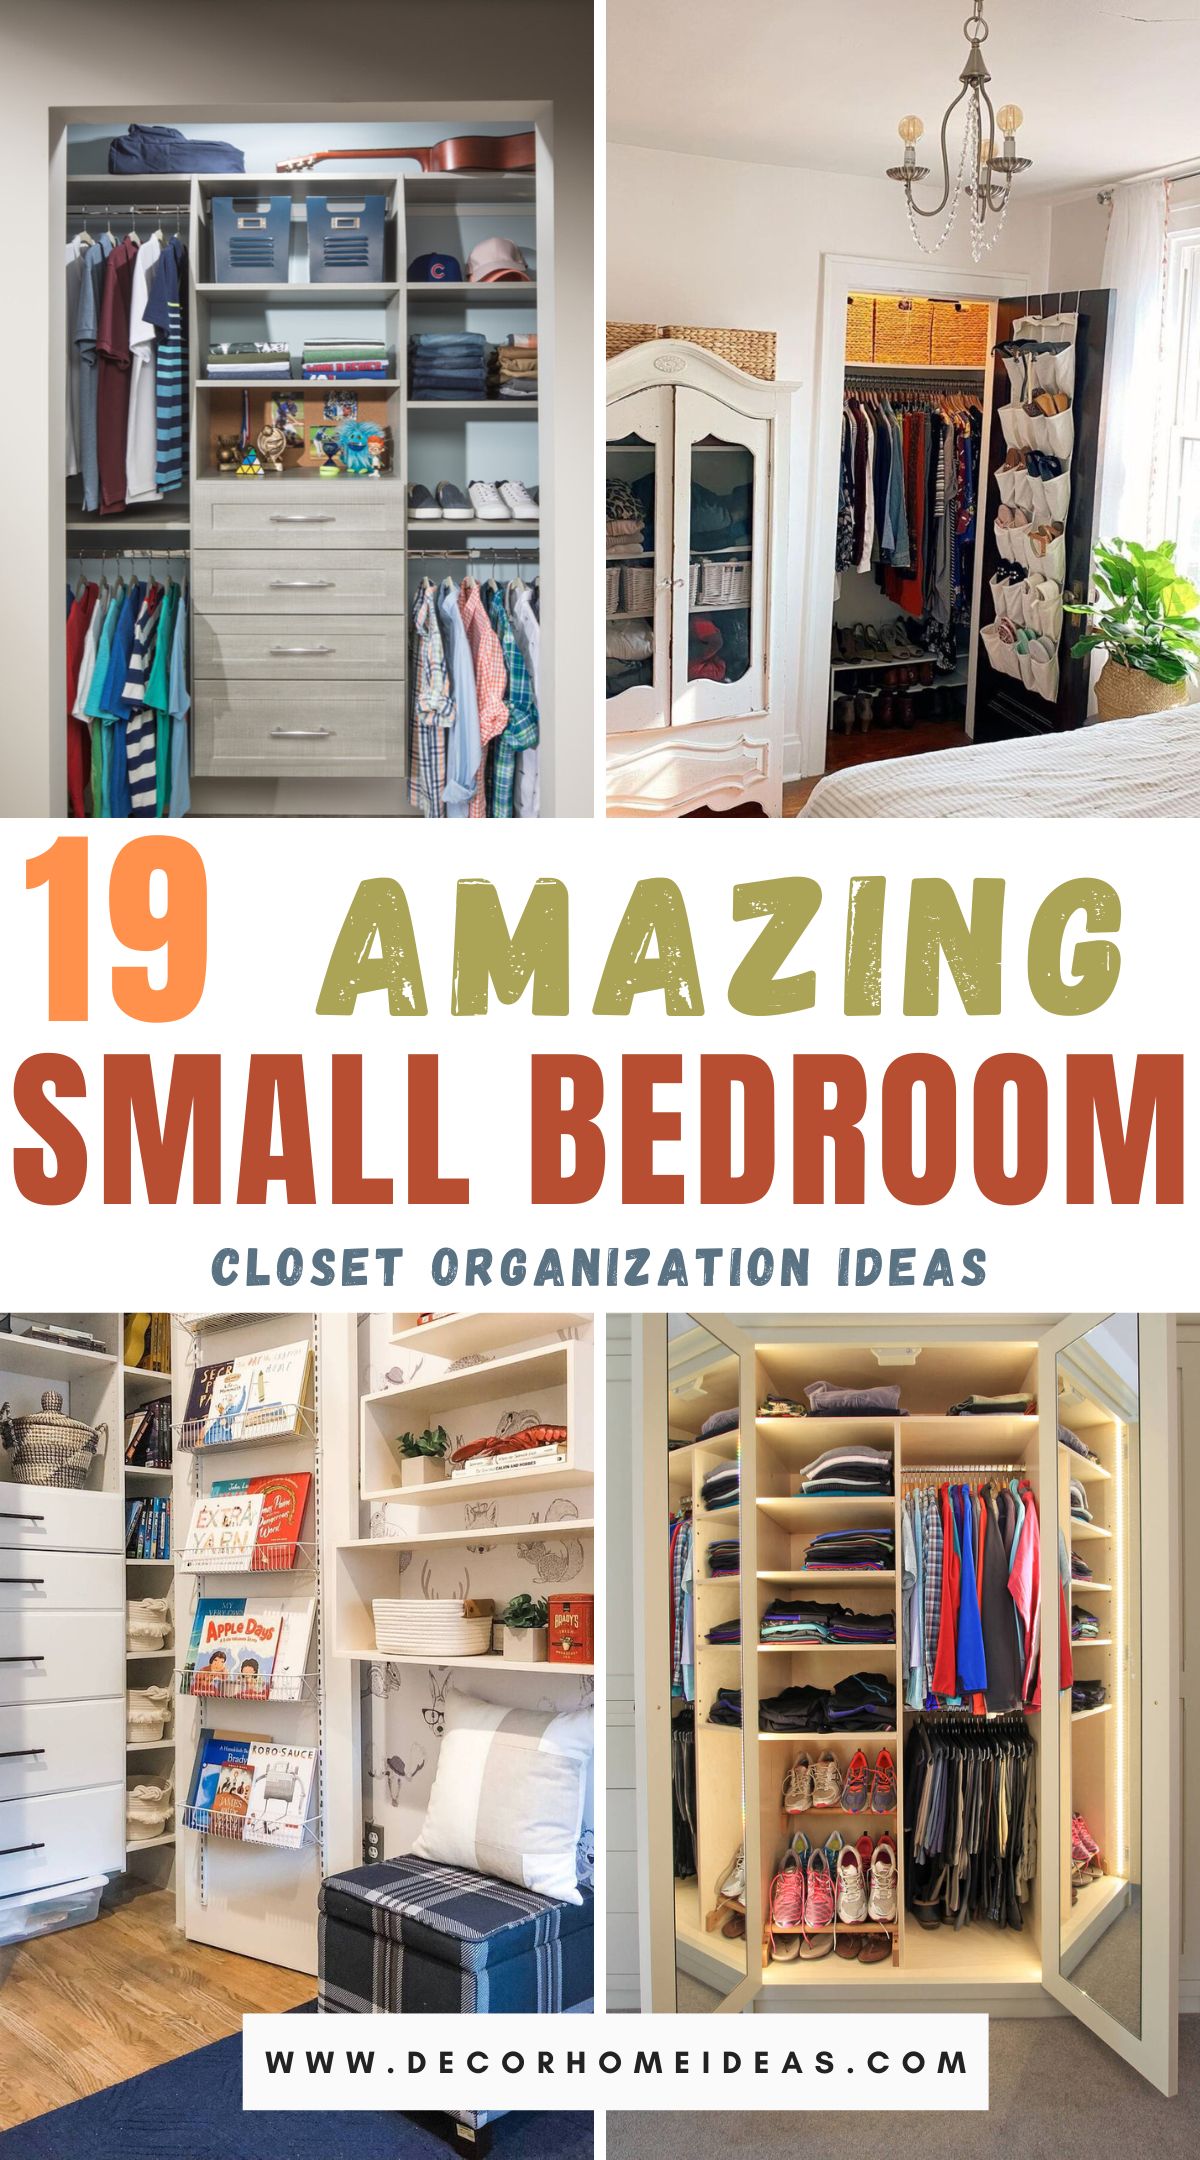 Maximize your small bedroom closet space with these 19 ingenious ideas. From clever storage solutions to space-saving organization hacks, discover how to make the most of every inch in your closet for a tidy and functional storage area.